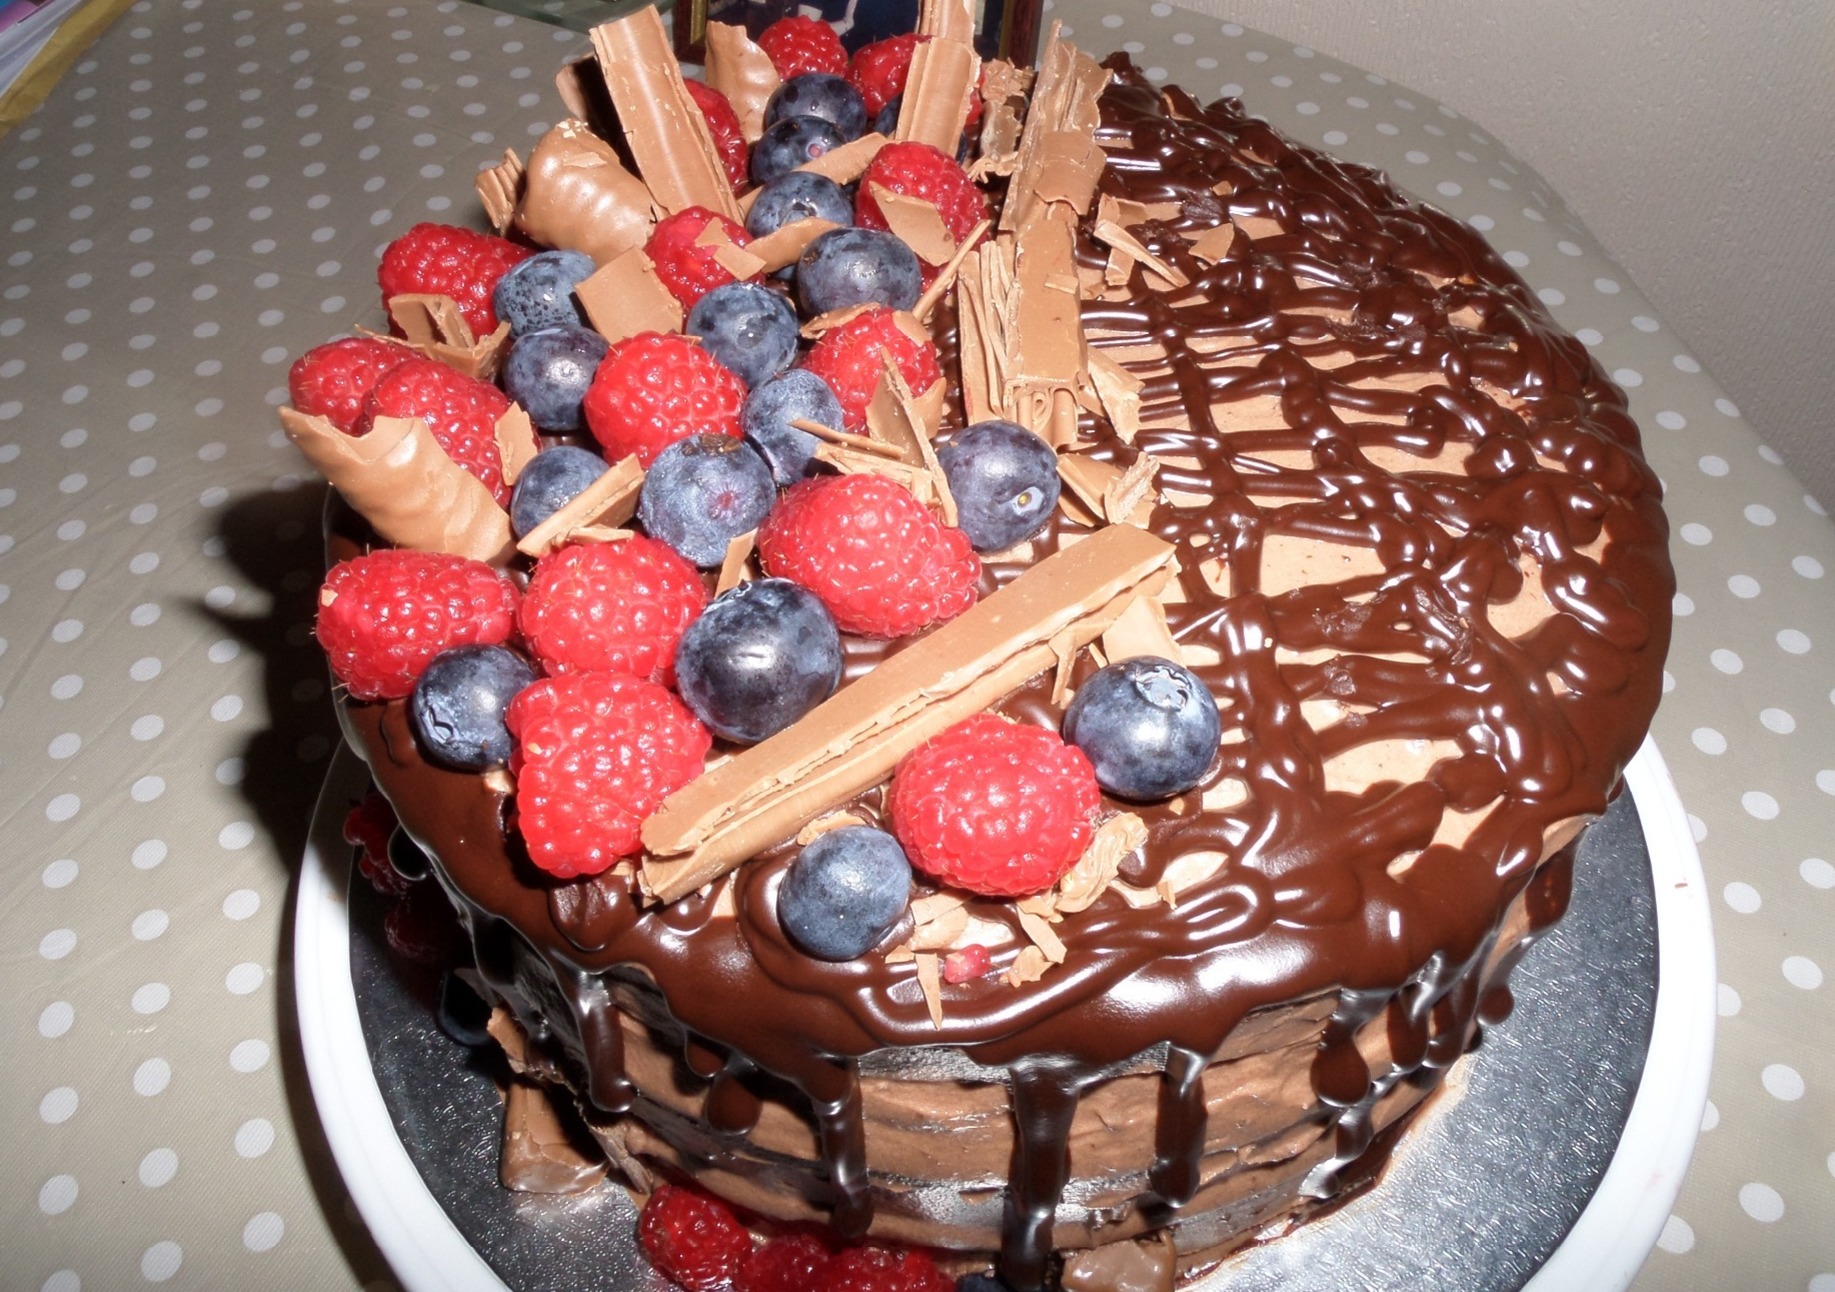 chocolate and fruit gateaux style